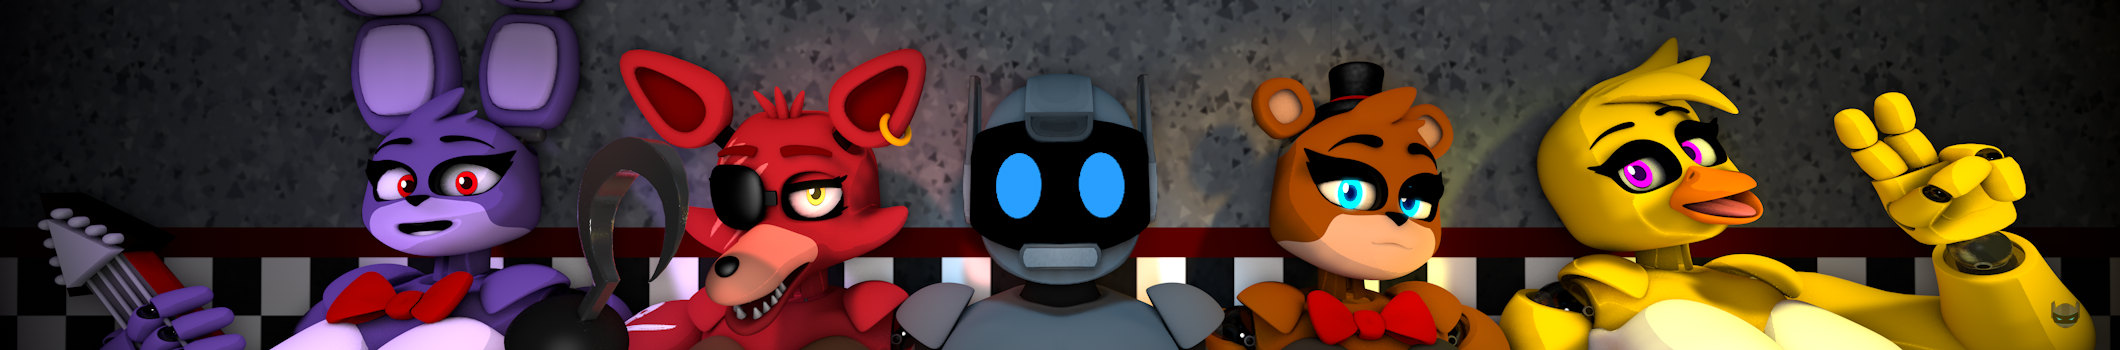 Five night at Freddy's Girl's [android] - five night at freddy's girl's [ android] by HEROGREY